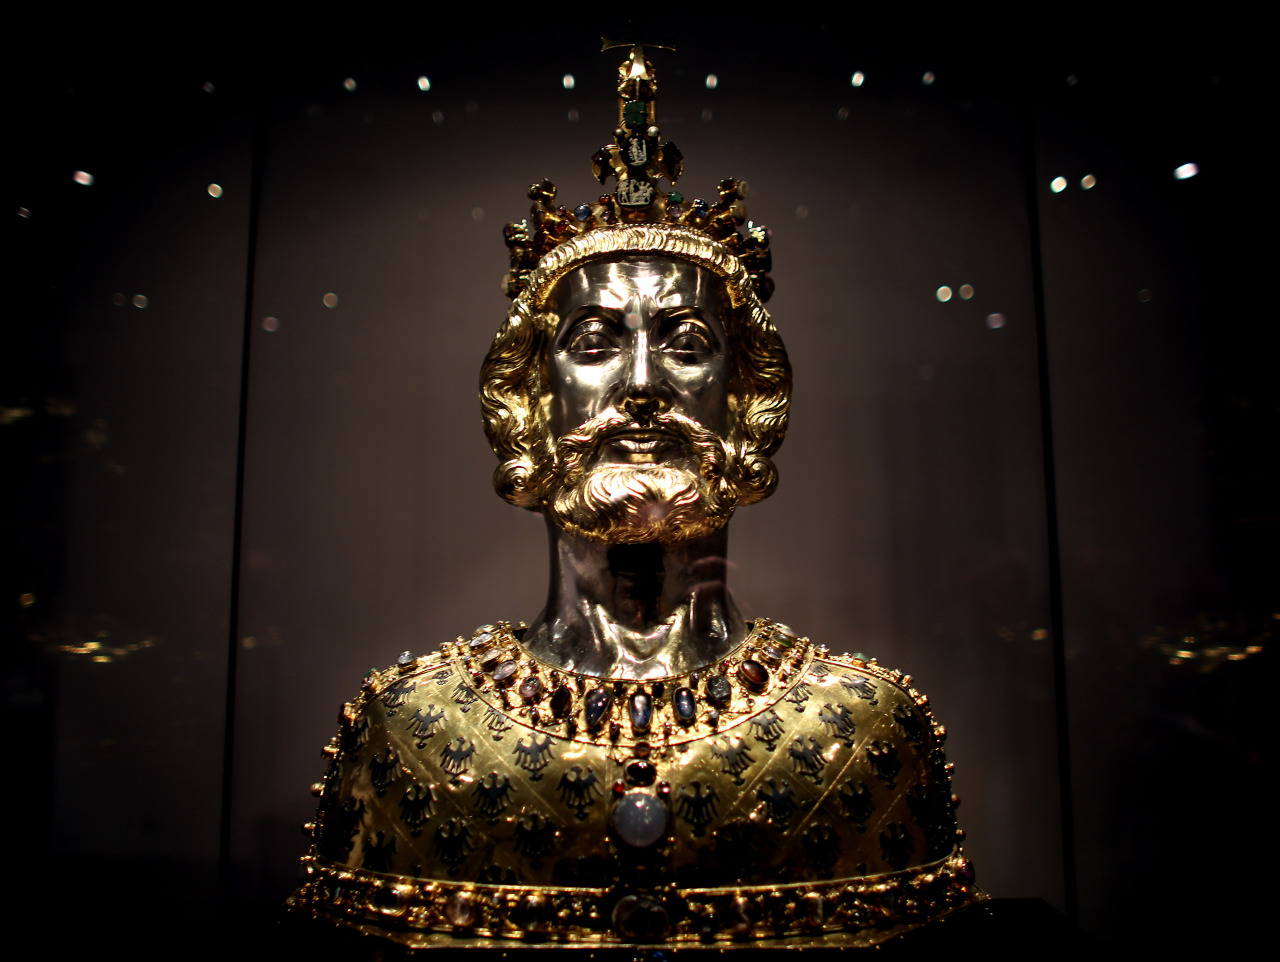 The Bust of Charlemagne is a reliquary in the form of the bust of Charlemagne made around 1350, which contains the king&rsquo;s skullcap. The reliquary is part of the Late Medieval treasure kept in the Aachen Cathedral Treasury. It is one of the most significant examples of Gothic goldwork and the best-known example of a reliquary bust anywhere. The reliquary is an idealised image, not an actual portrait of Charlemagne.(Click on the image. It’s breathtaking.)